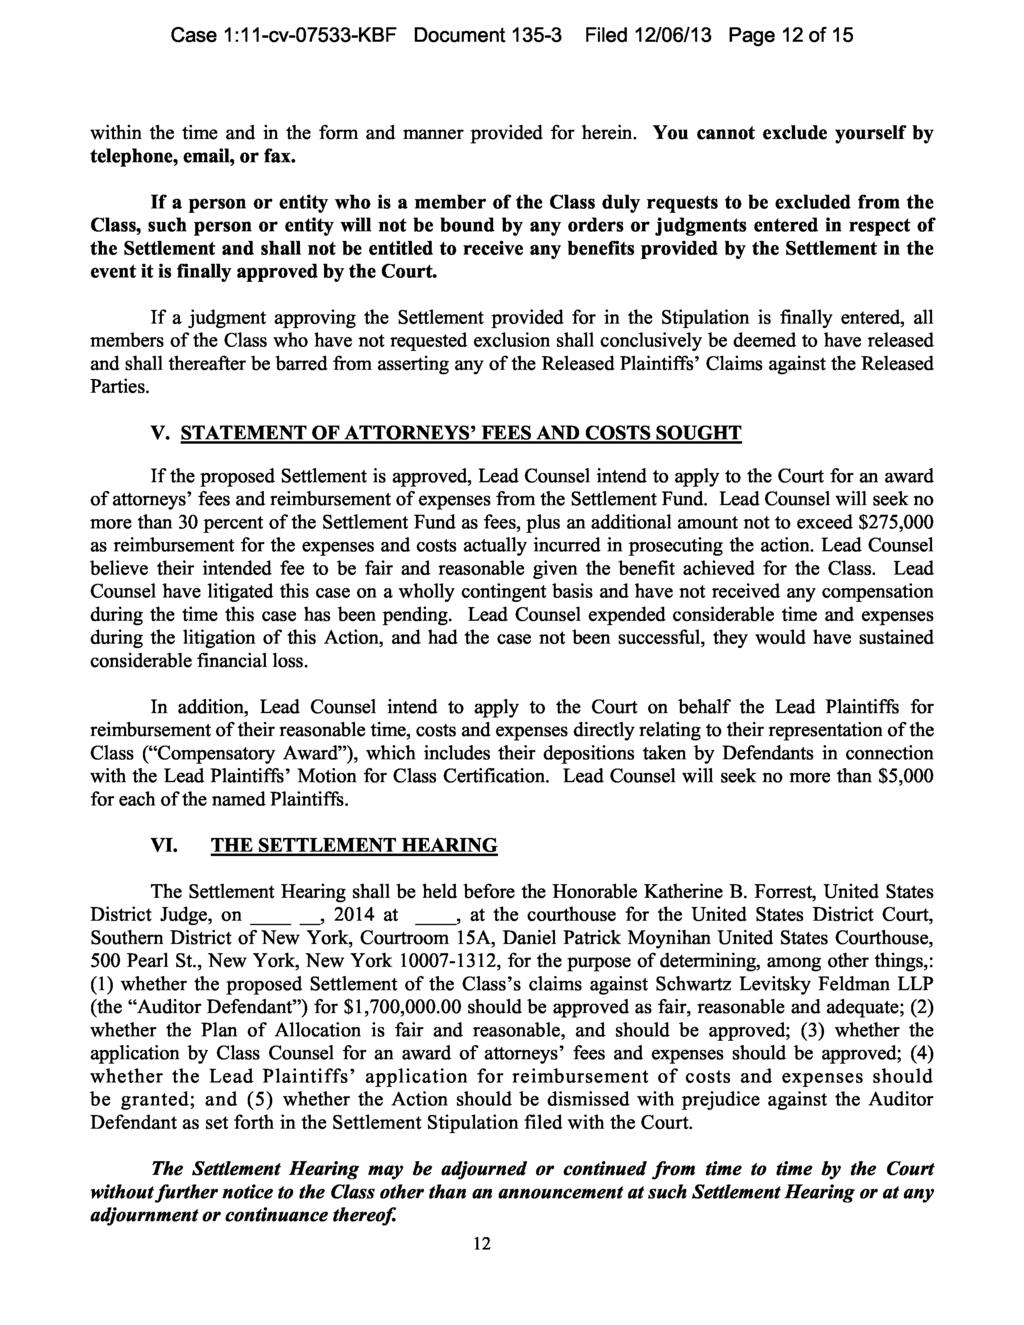 Case 1:11-cv-07533-KBF Document 135-3 Filed 12/06/13 Page 12 of 15 within the time and in the form and manner provided for herein. telephone, email, or fax.